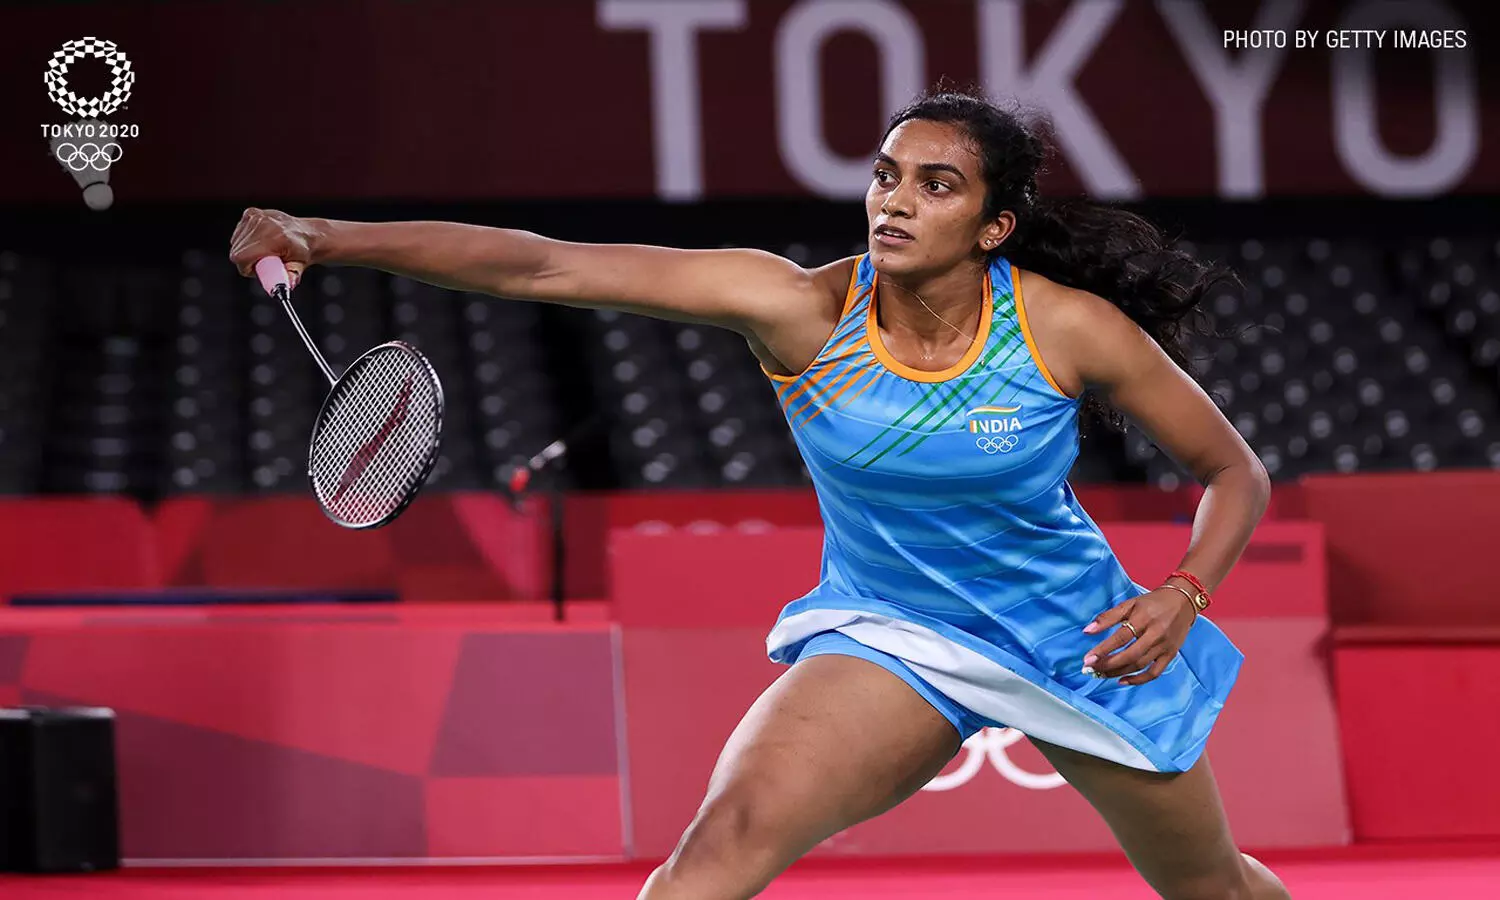 PV Sindhu wins bronze medal to create history for India at Tokyo Olympics